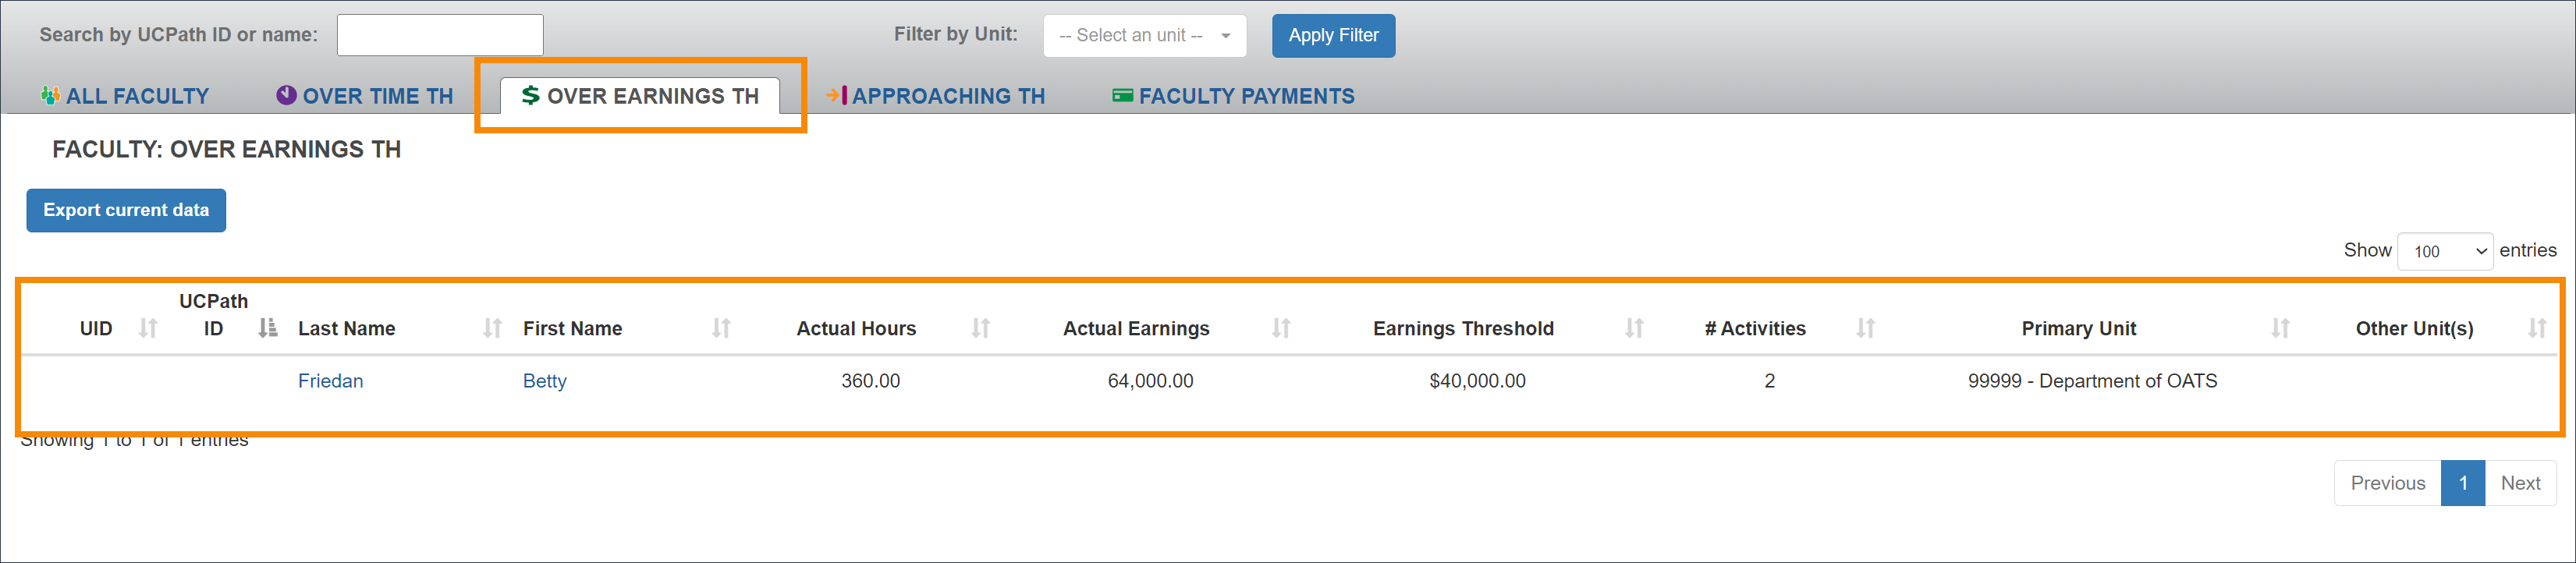 Over Earnings Threshold tab that shows Health Science faculty members that exceed their earnings threshold